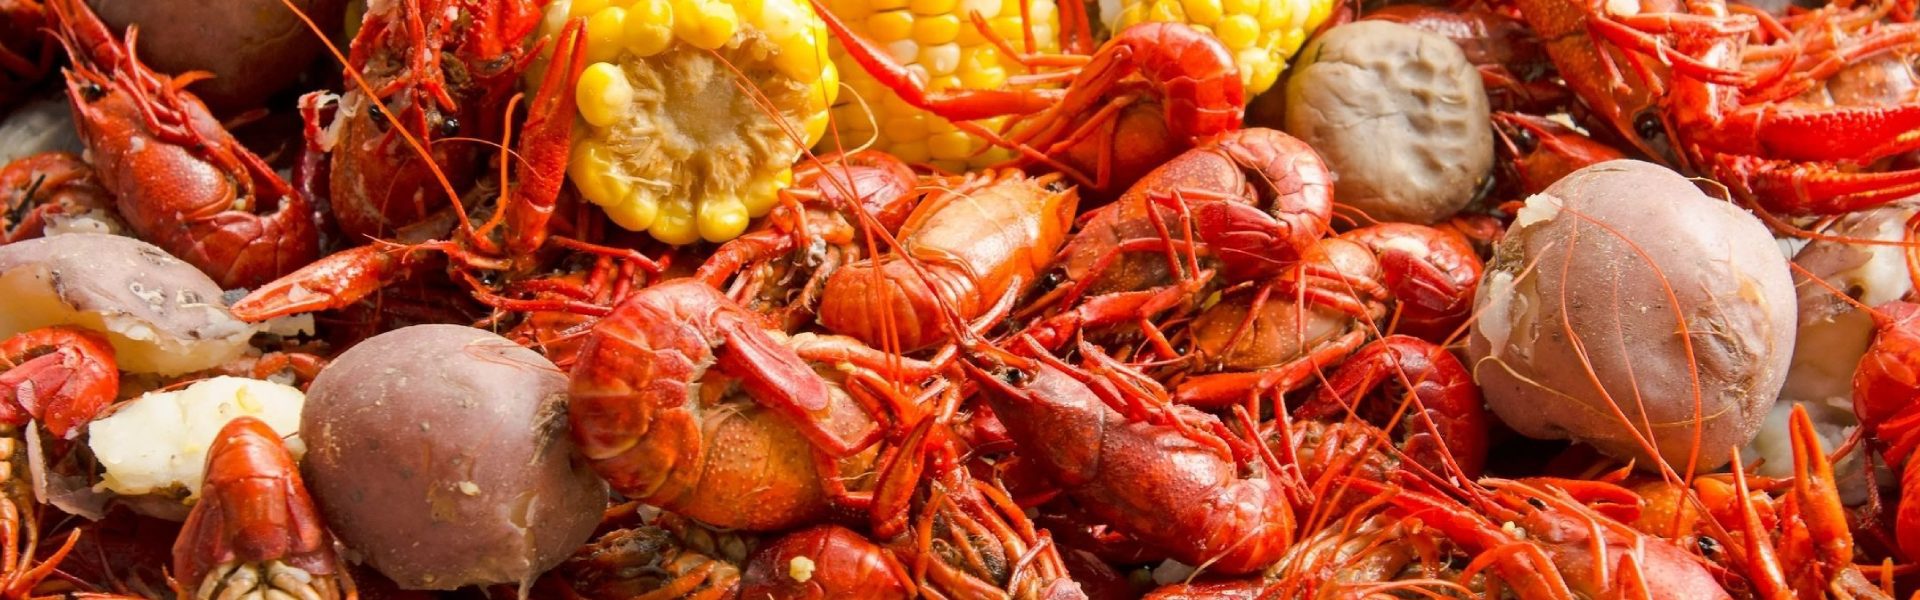 A pile of crawfish next to corn on the cob.